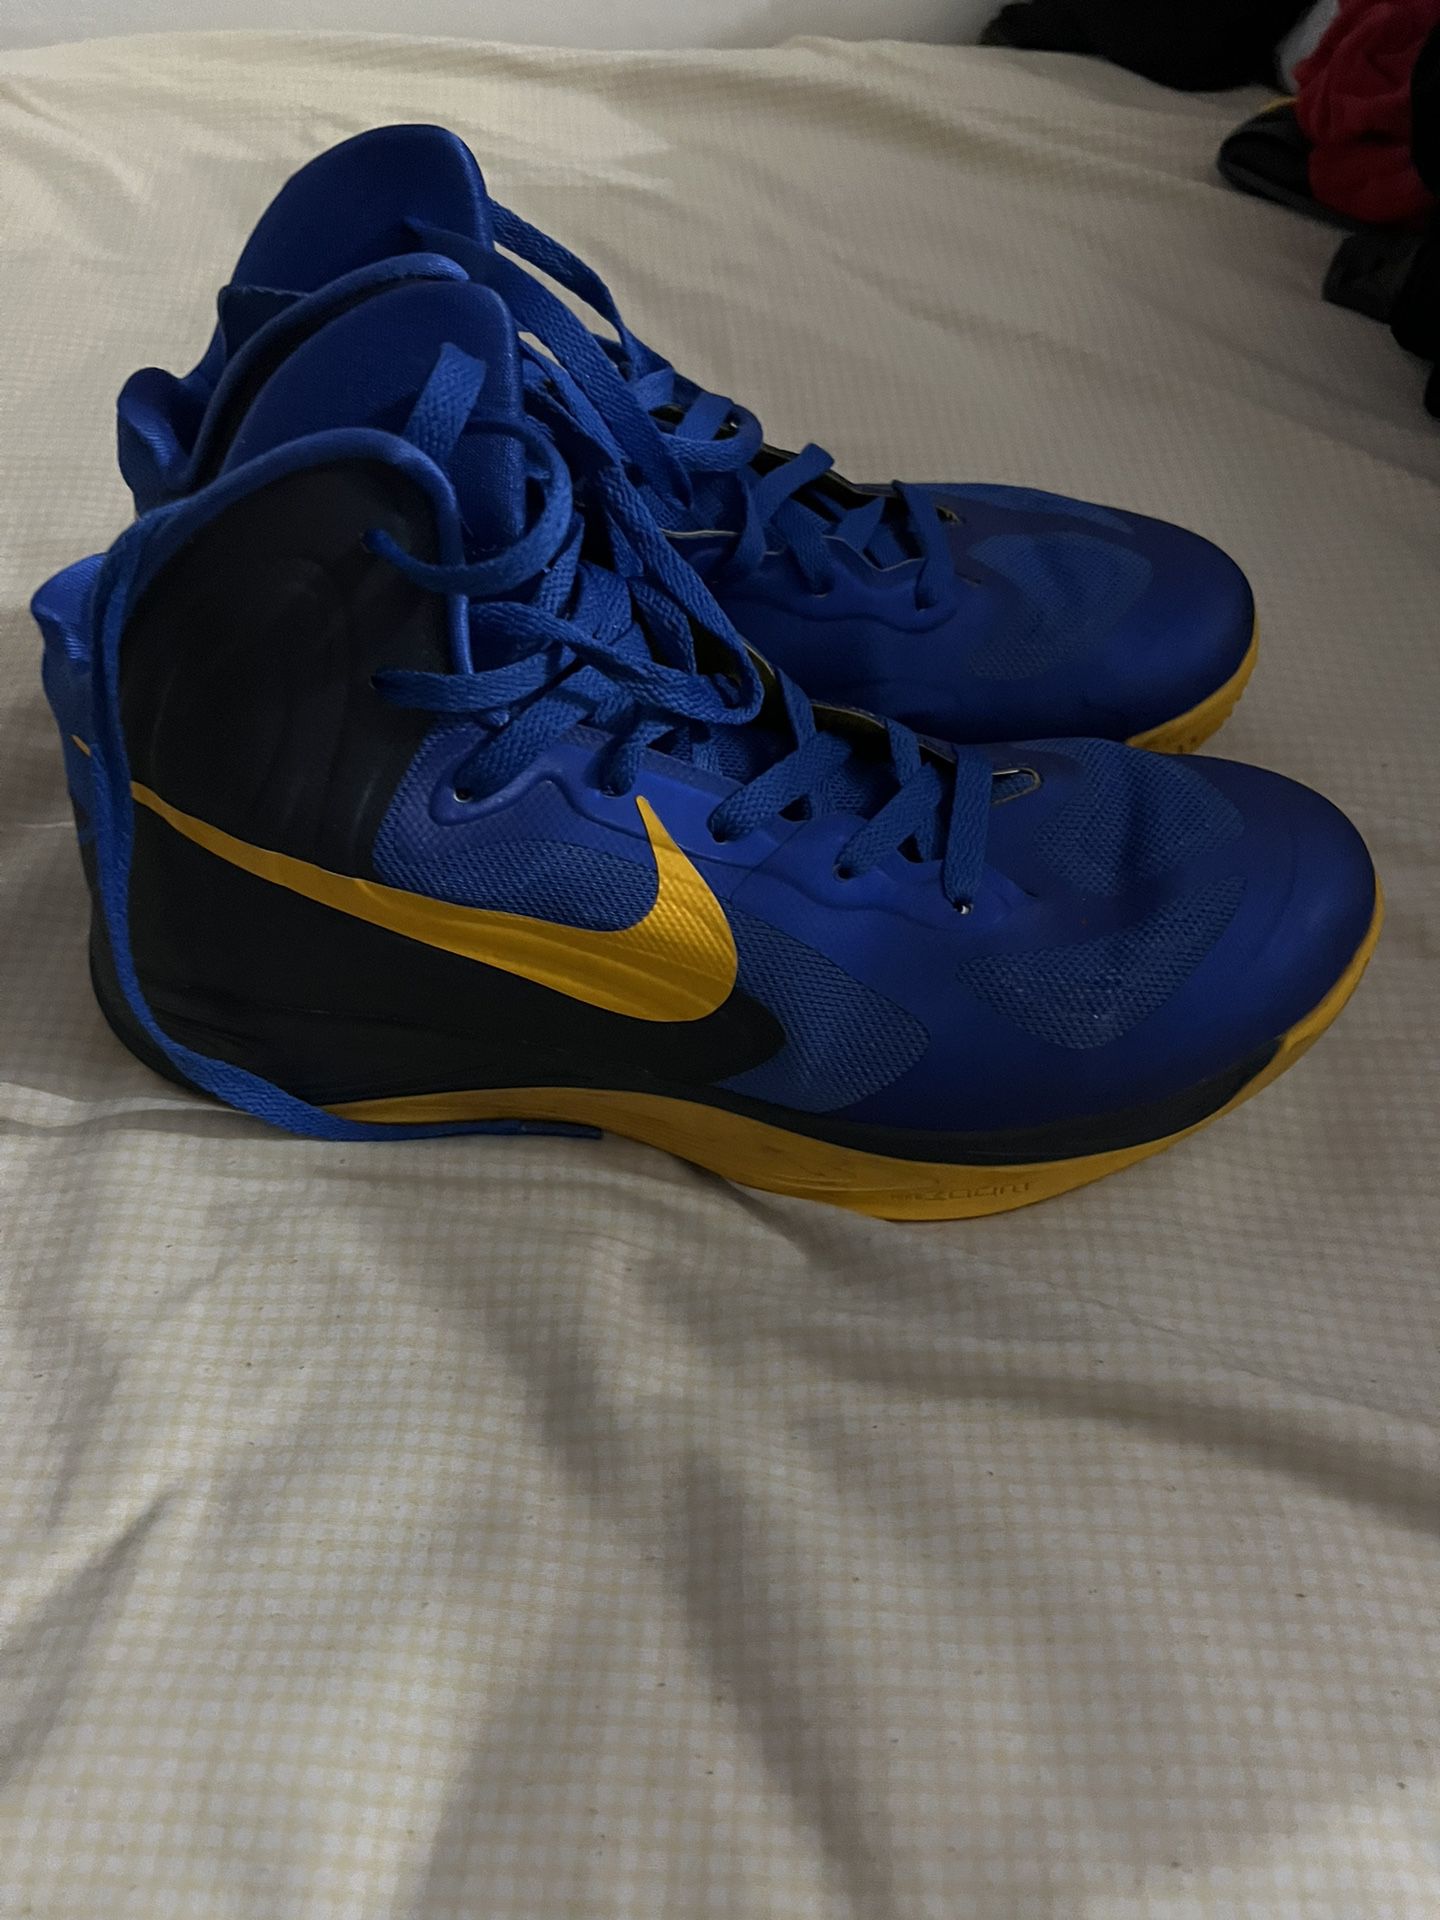 Nike Stephen Curry 2012 Hyperfuse Basketball Shoes for Sale in San Leandro,  CA - OfferUp